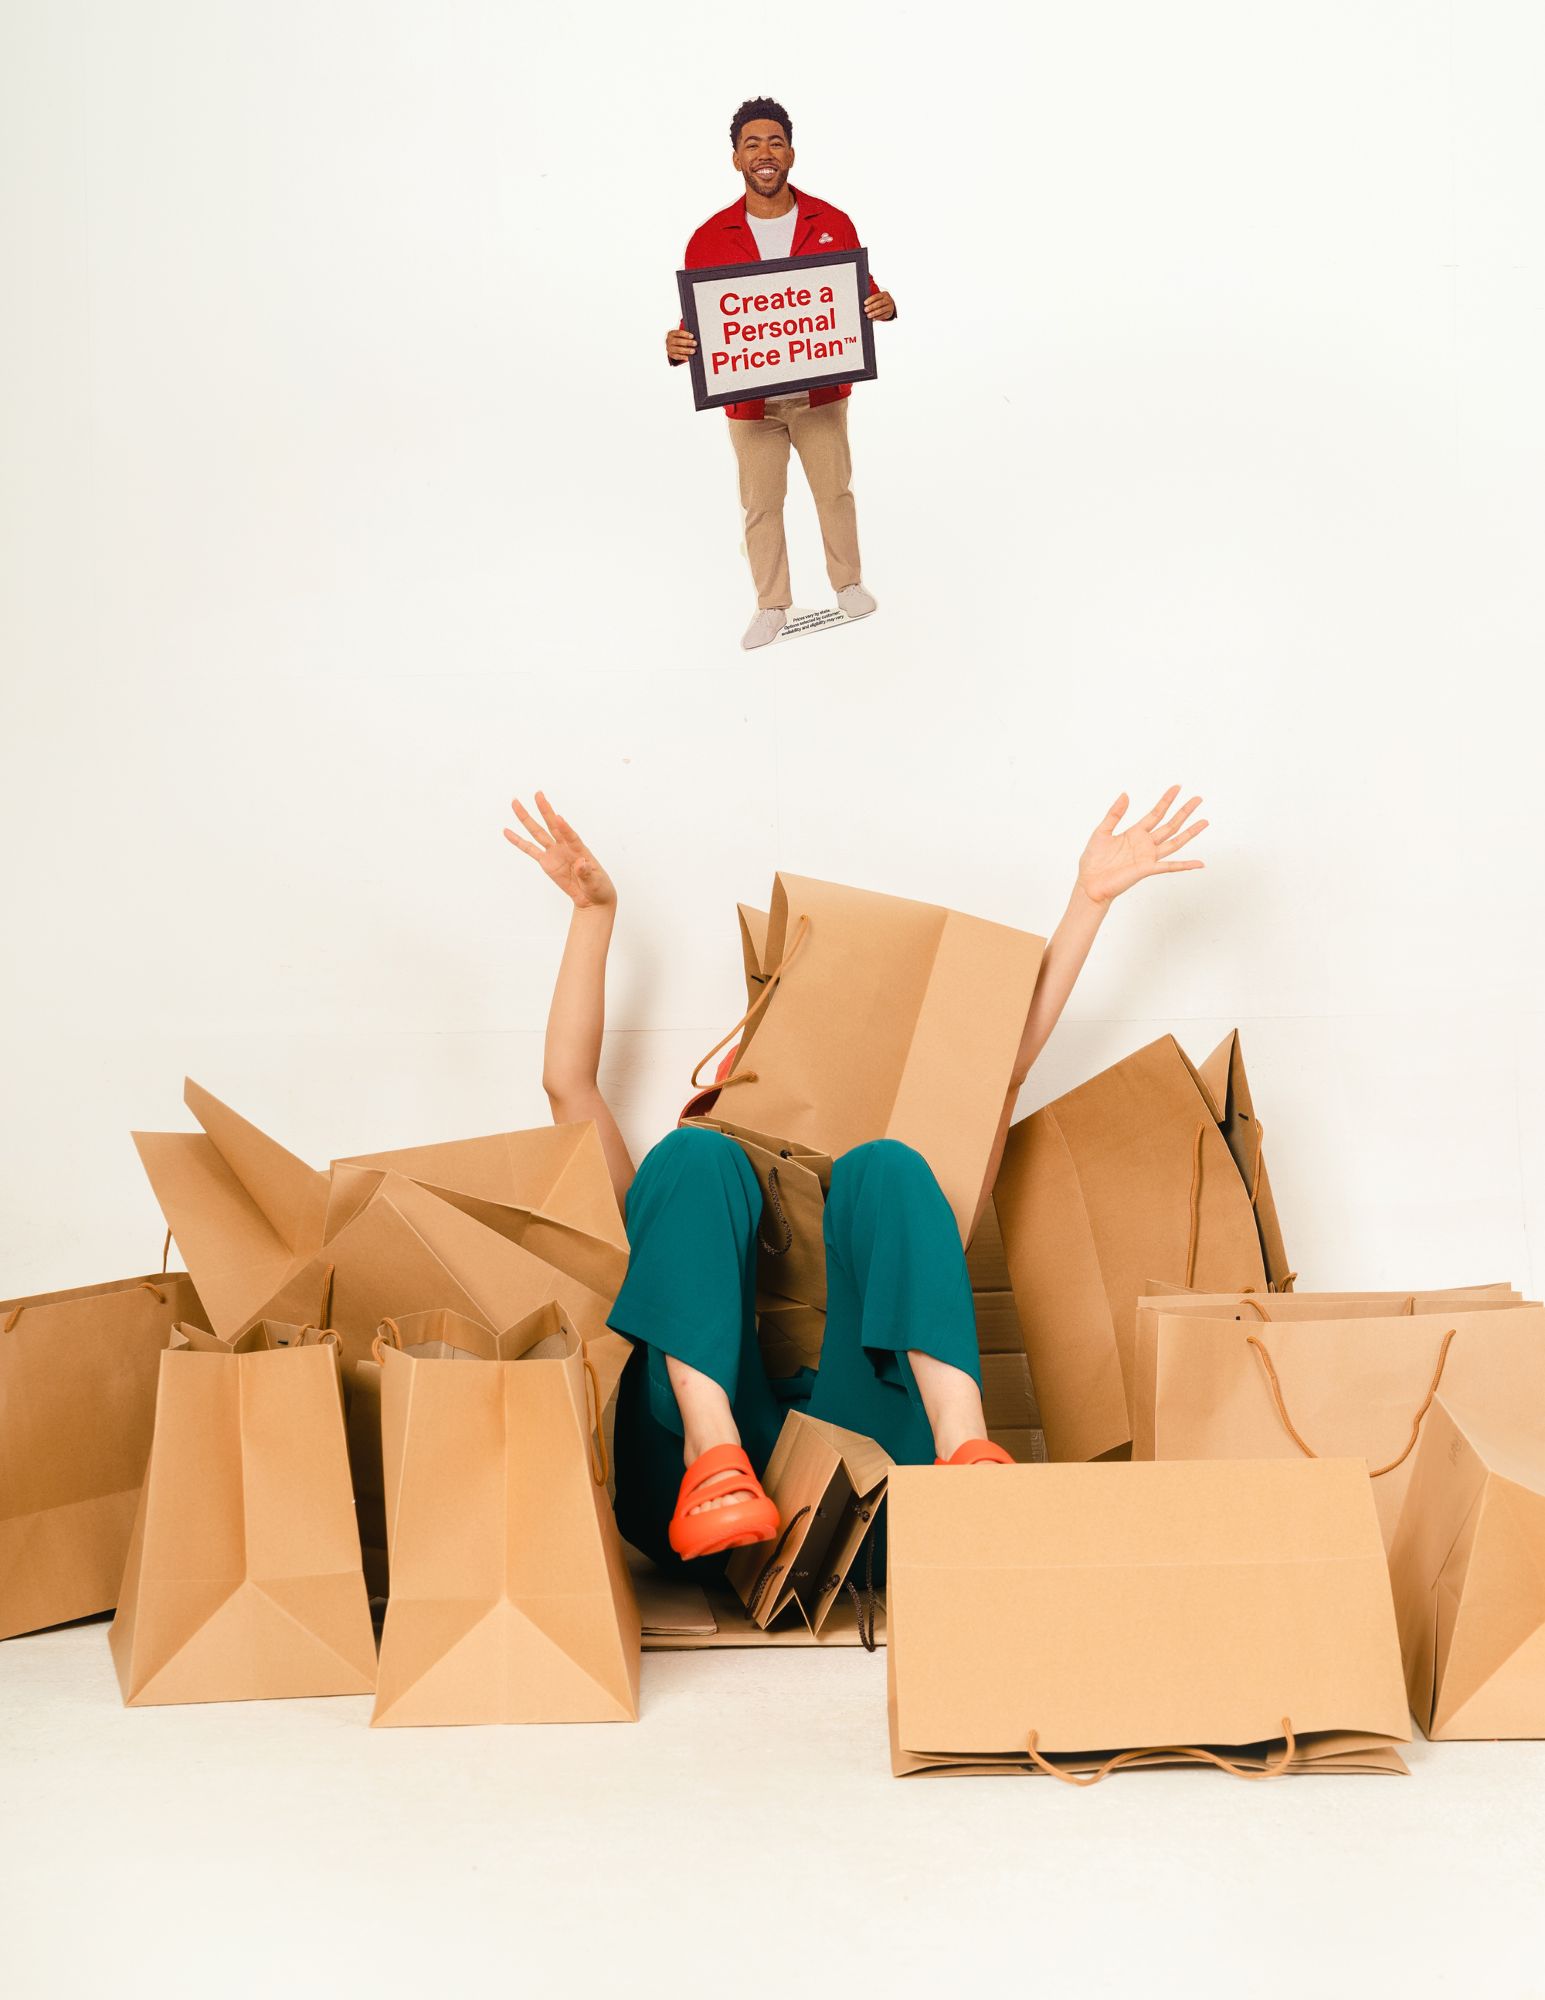 Insurance made easy, just like jumping in a pile of cardboard boxes! Trust Mark Doyle - your State F Mark Doyle - State Farm Insurance Agent Ames (515)232-8090